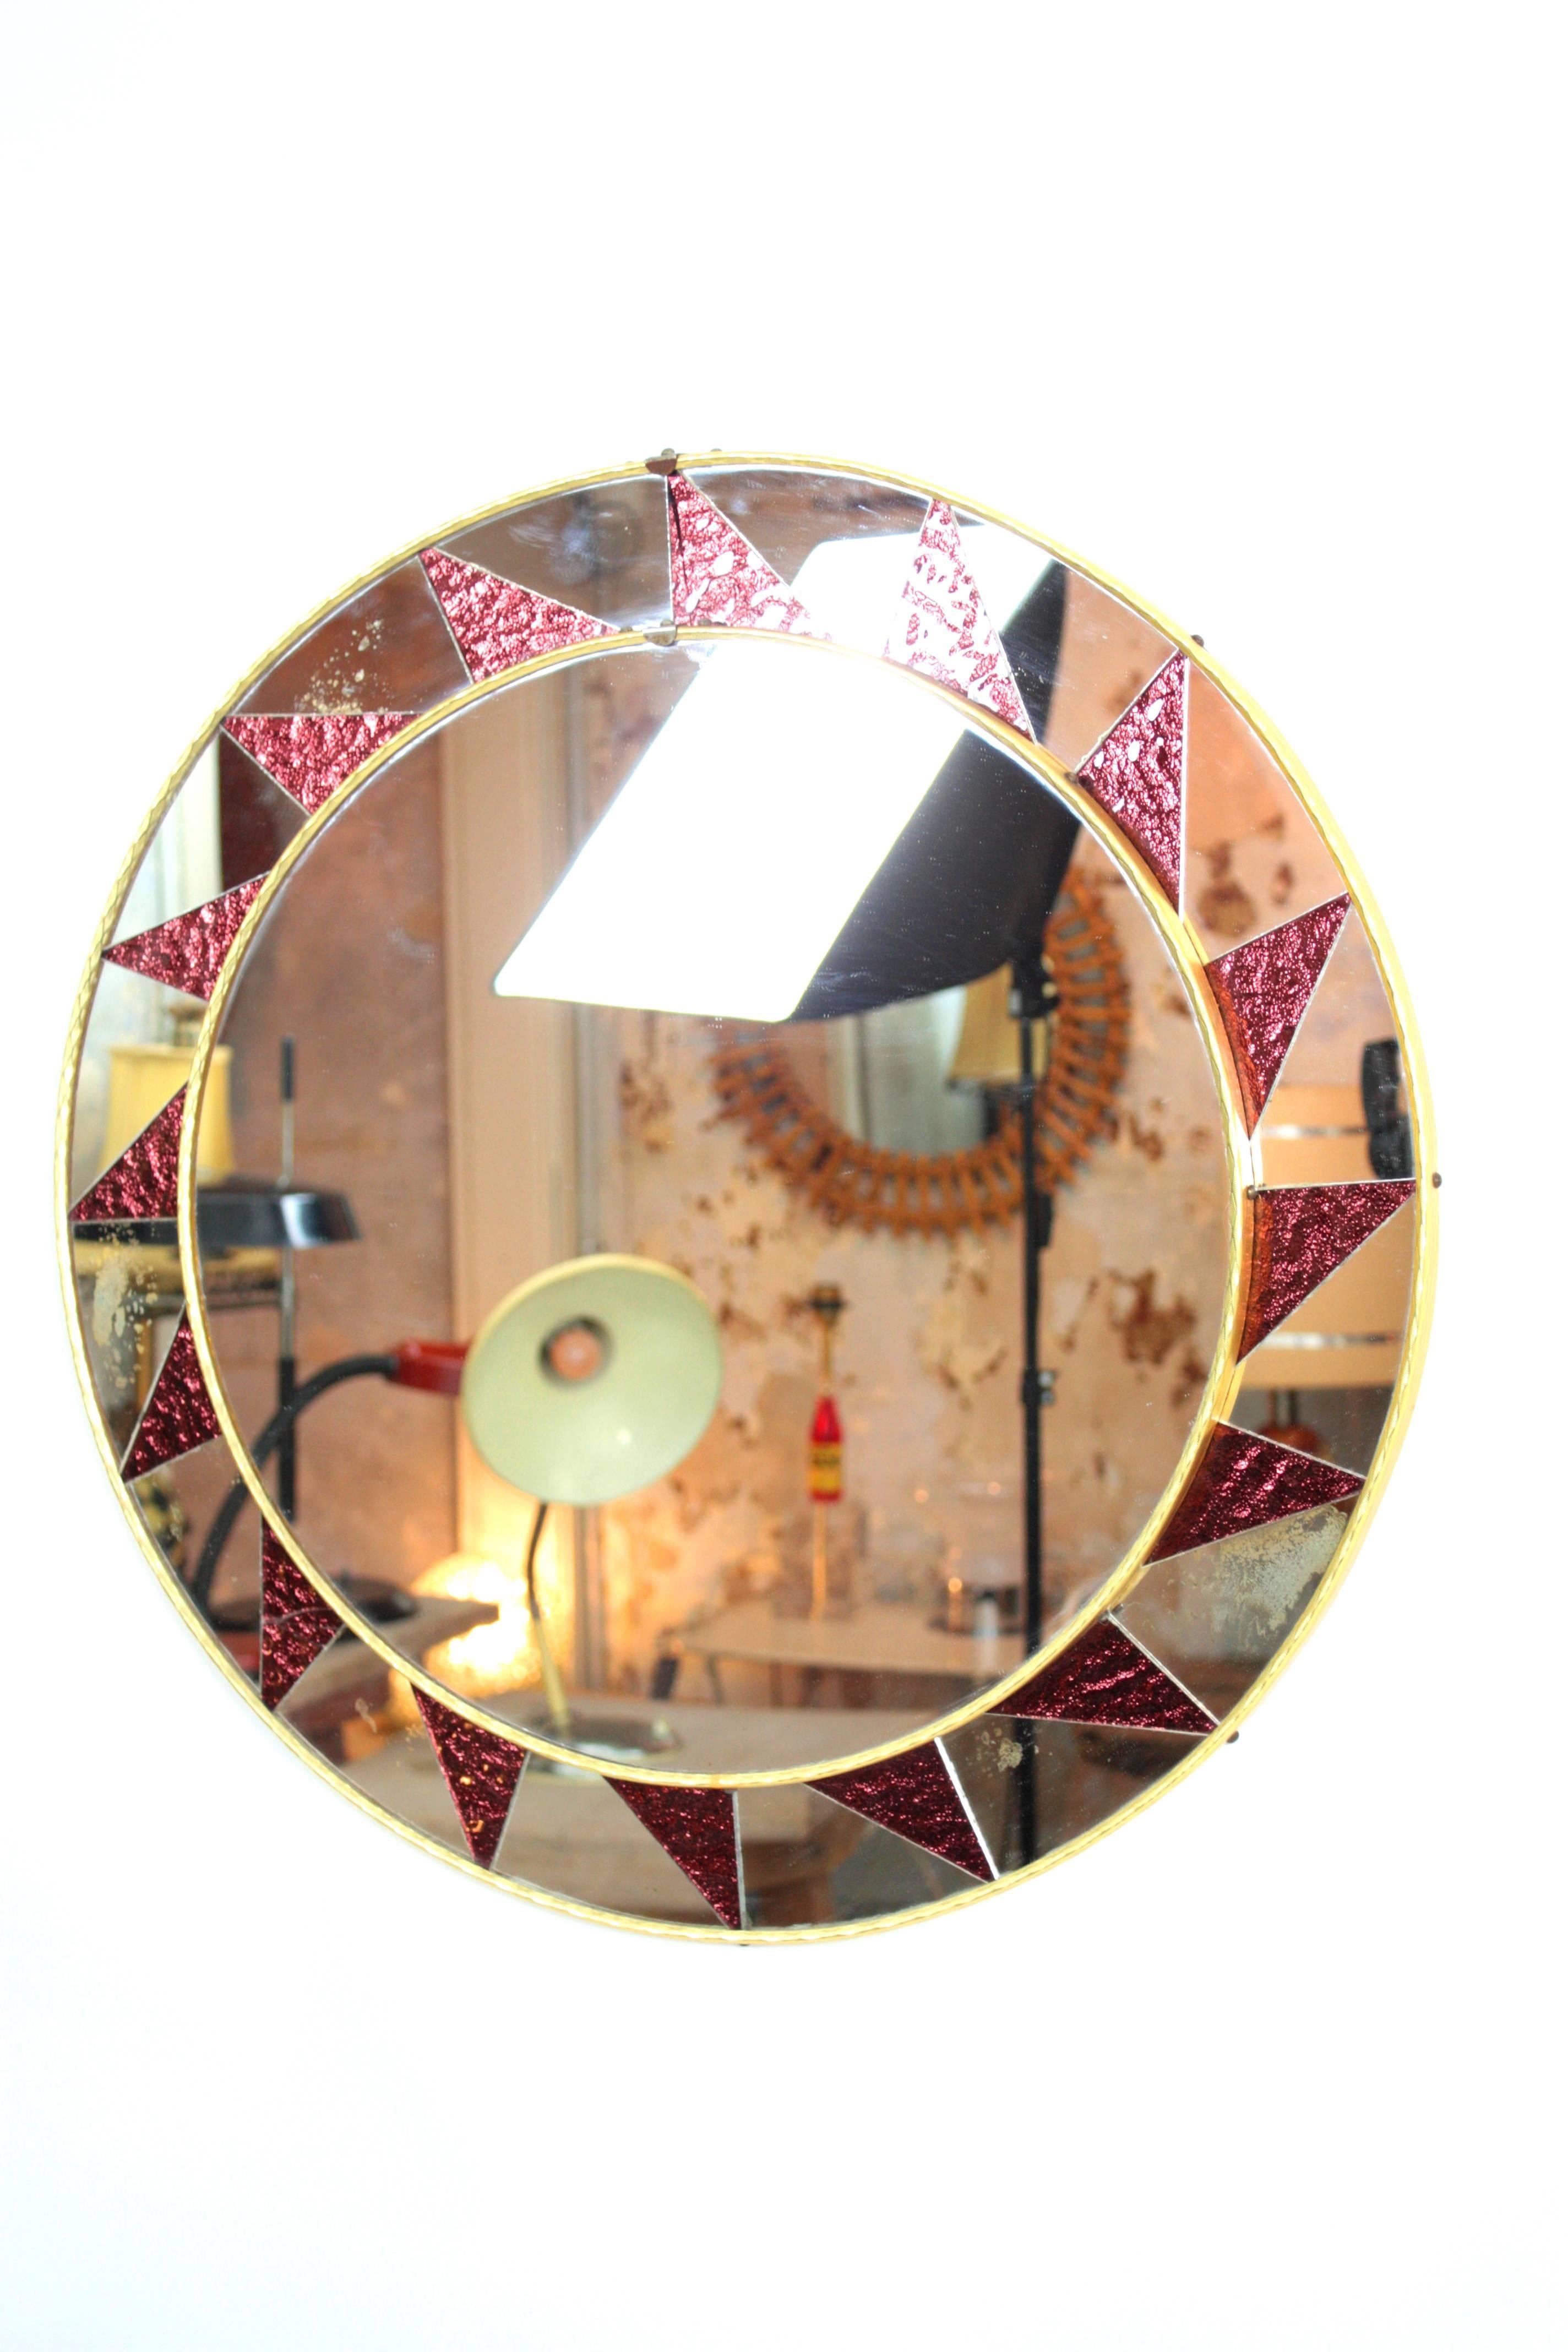 Spanish 1960s Mosaic Circular Mirror Framed by a Pattern of Garned Mirrored Glasses For Sale